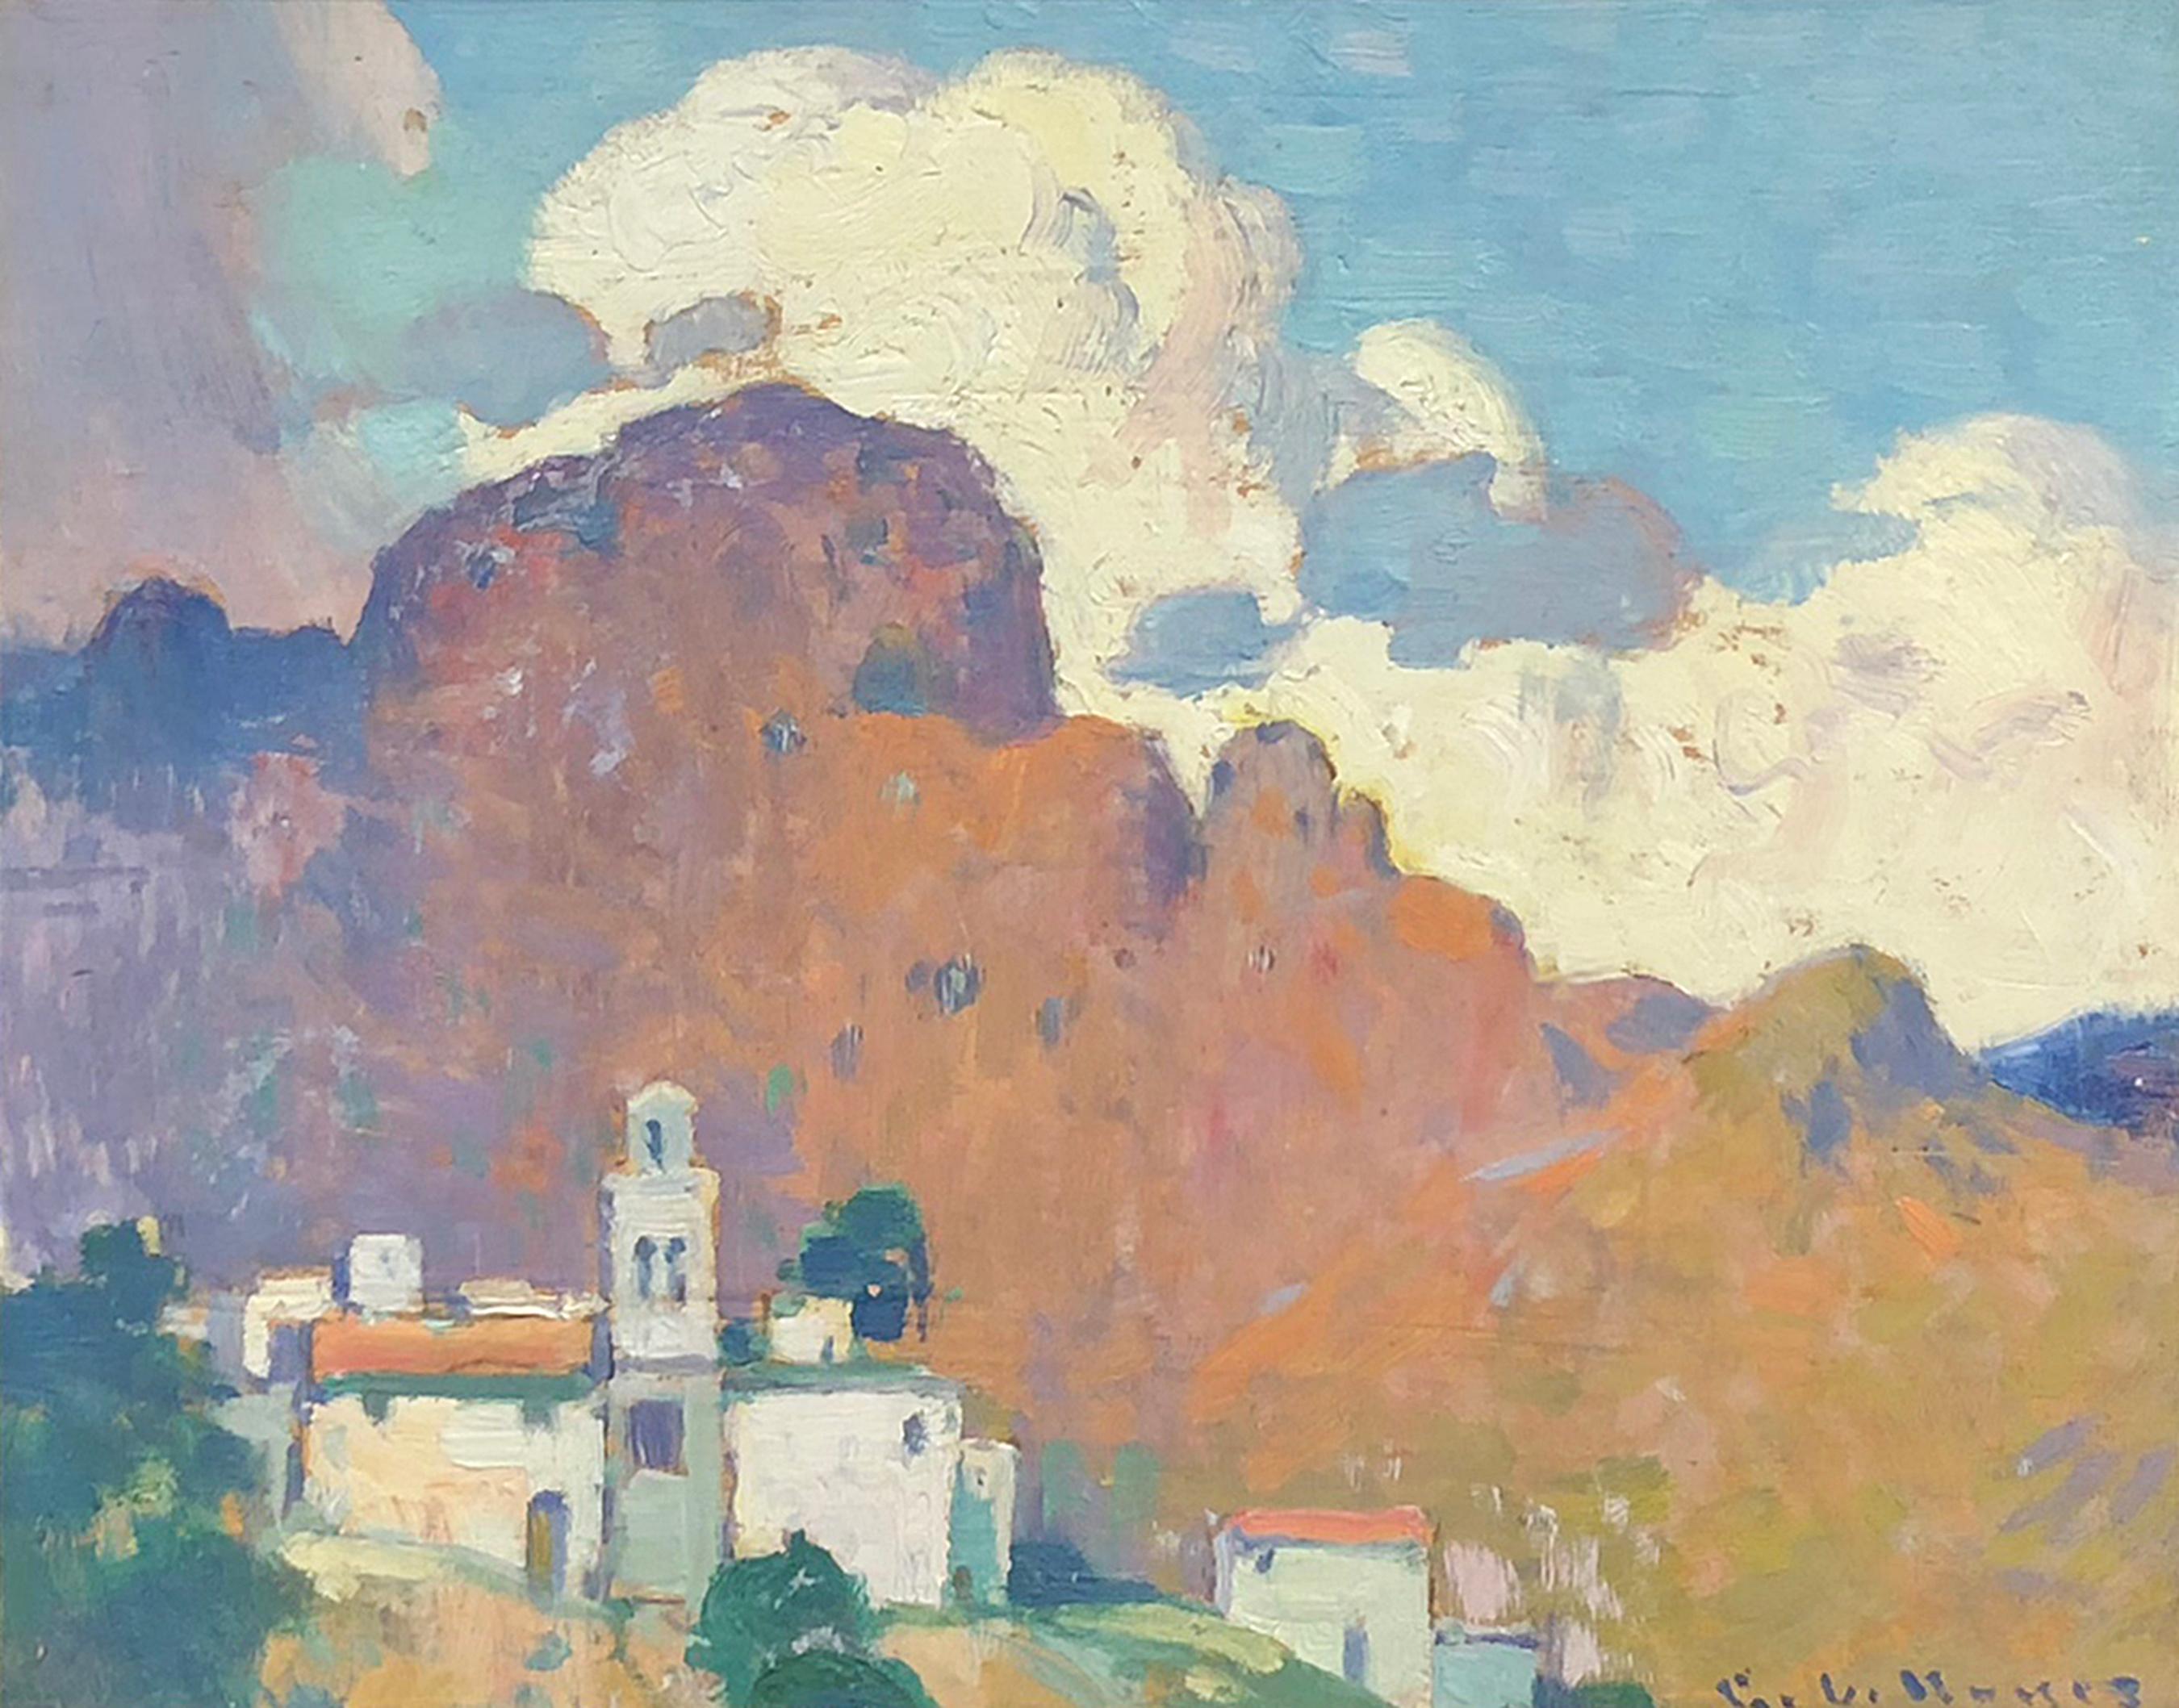 Mission in the Hills (Ravello, Amalfi Coast, Italy) - Painting by George Loftus Noyes